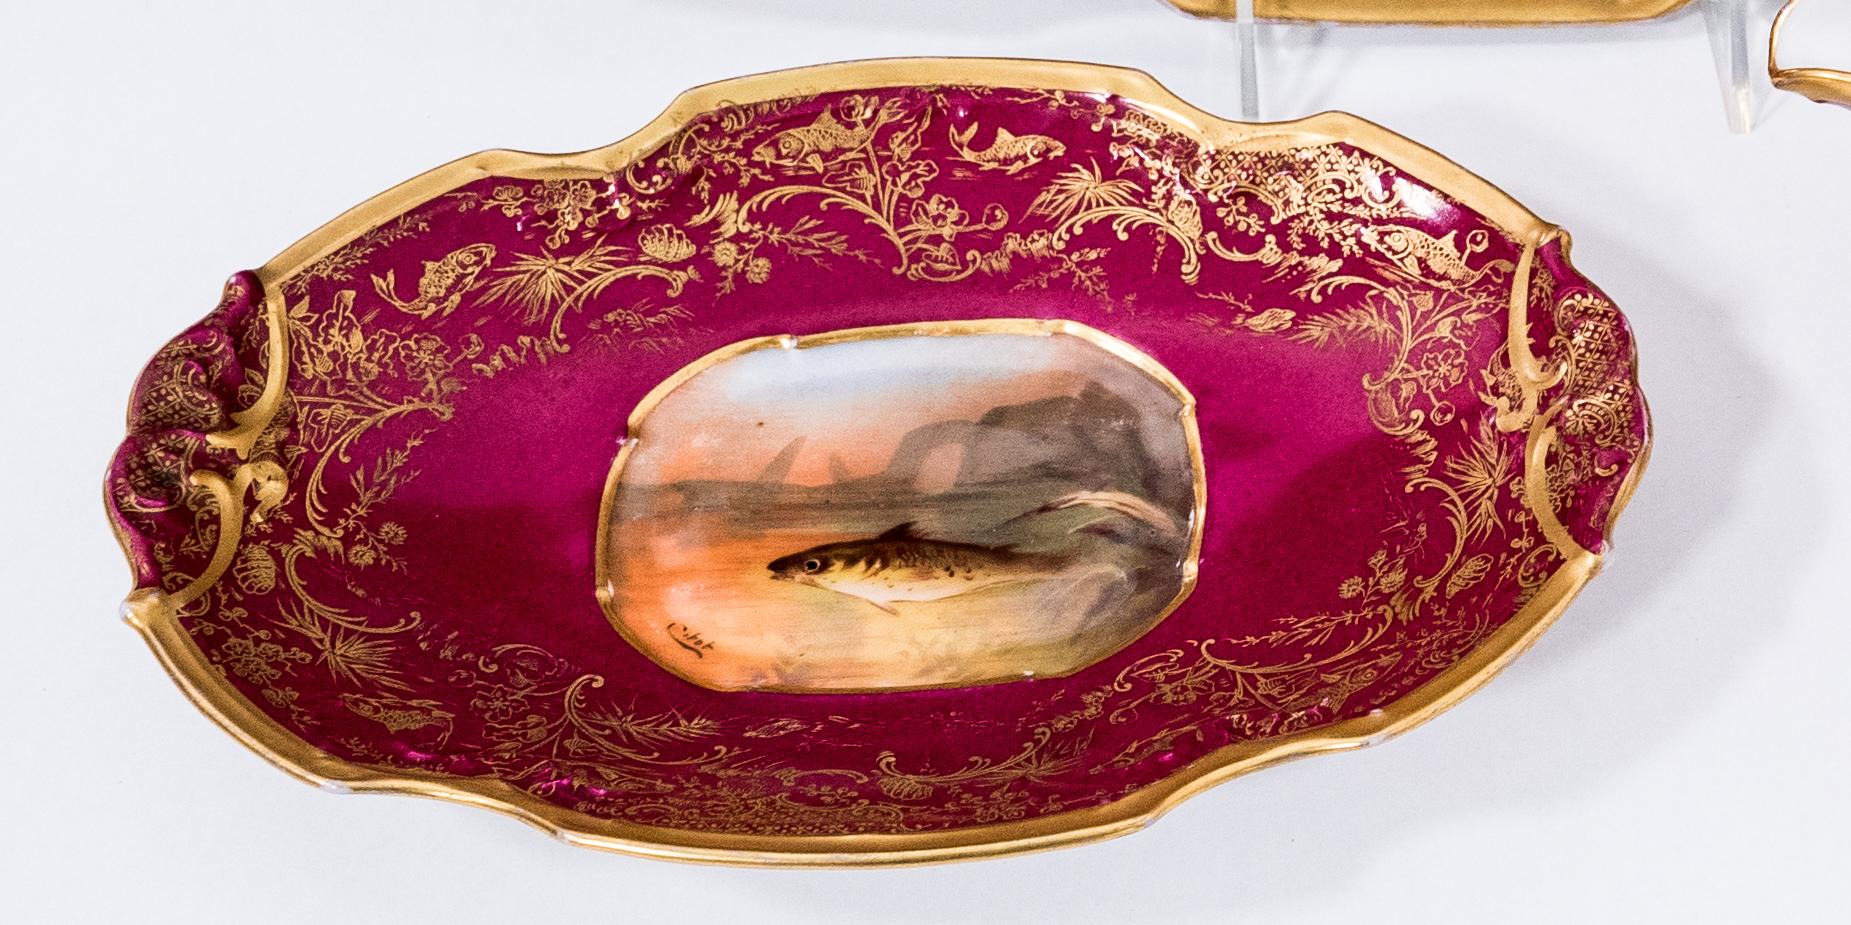 Late 19th Century 15 Piece Fish Set with Platter, Sauce Boat & 12 Plates, Antique Limoges Ruby